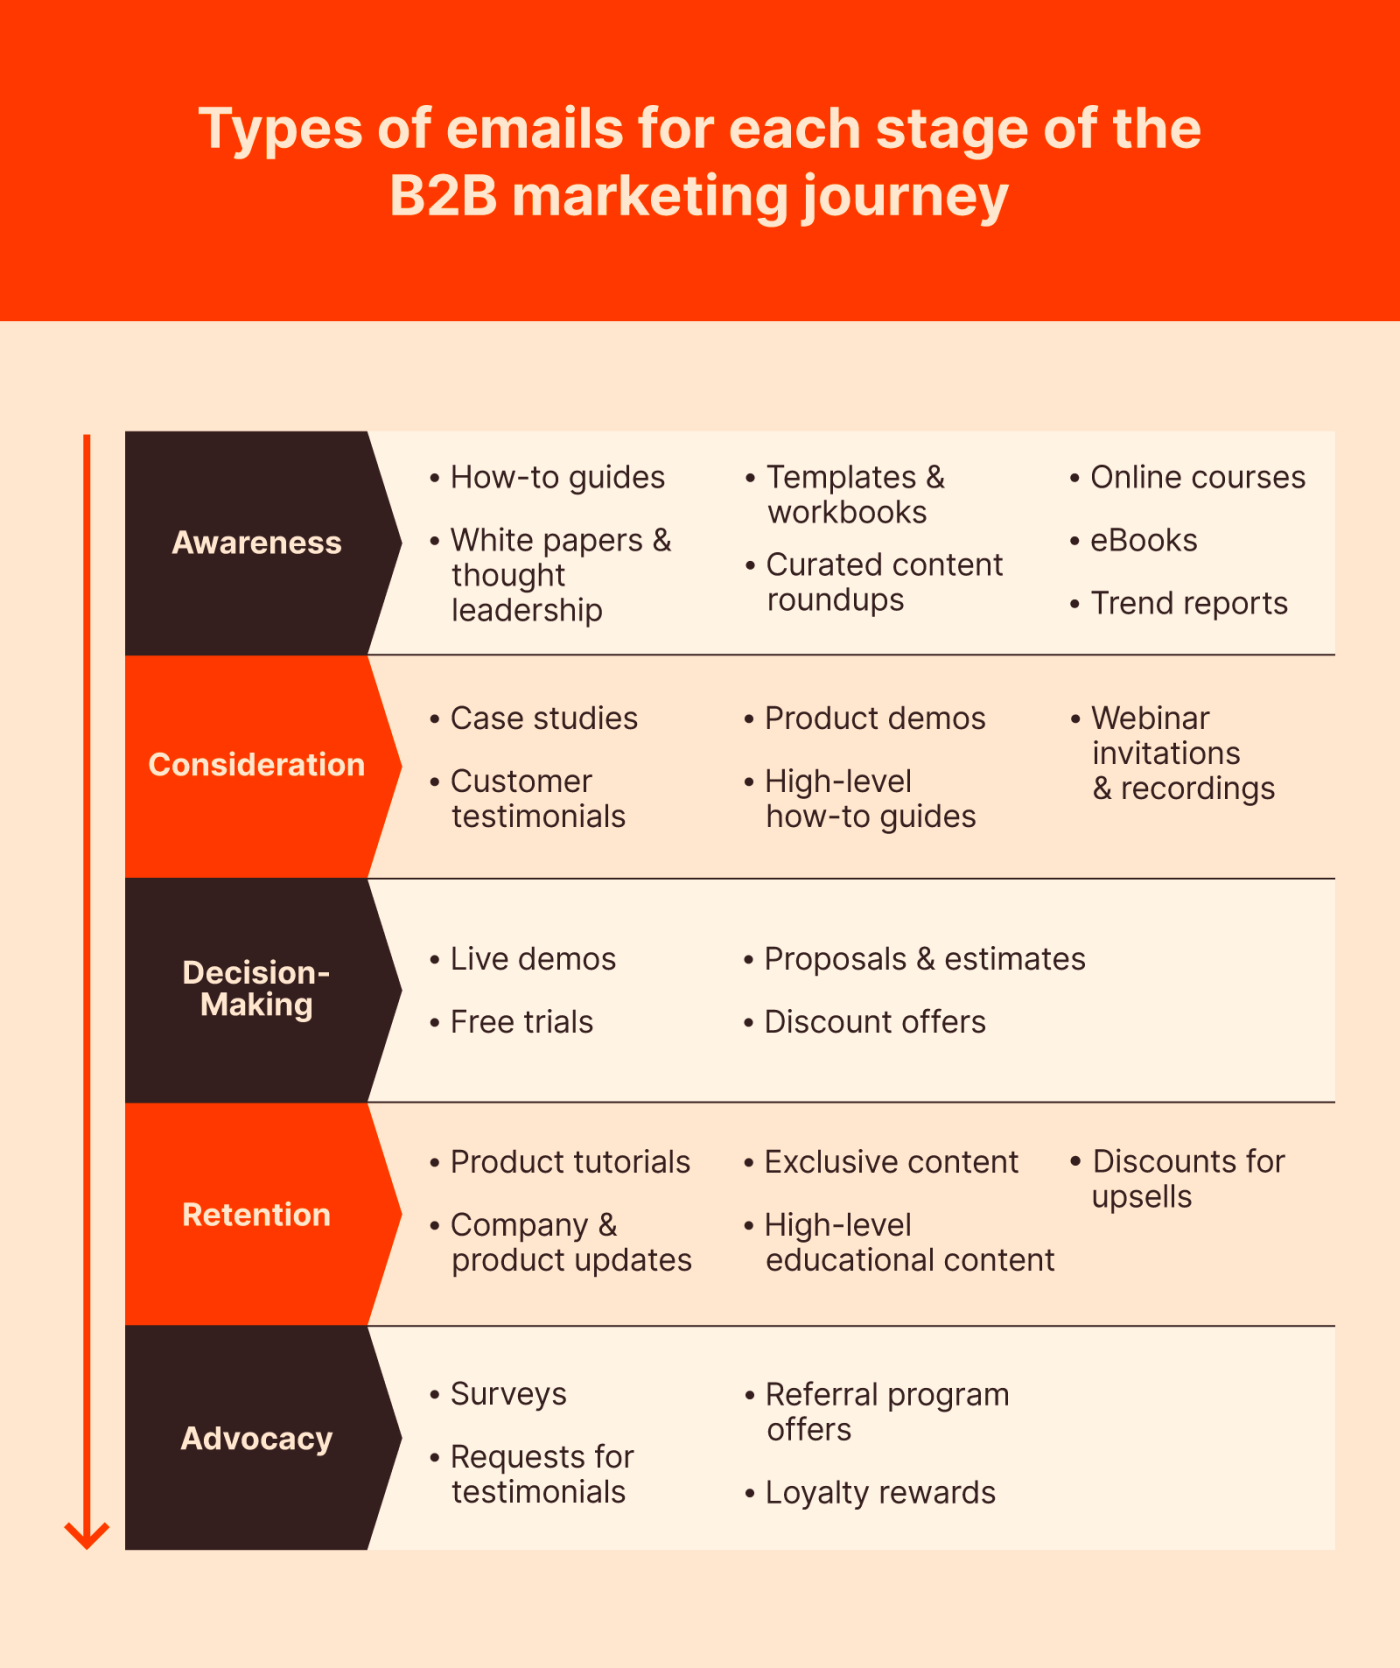 Types of emails for each stage of the B2B marketing journey: select the type of content you want to include in your emails based on where the recipient is in their customer journey.